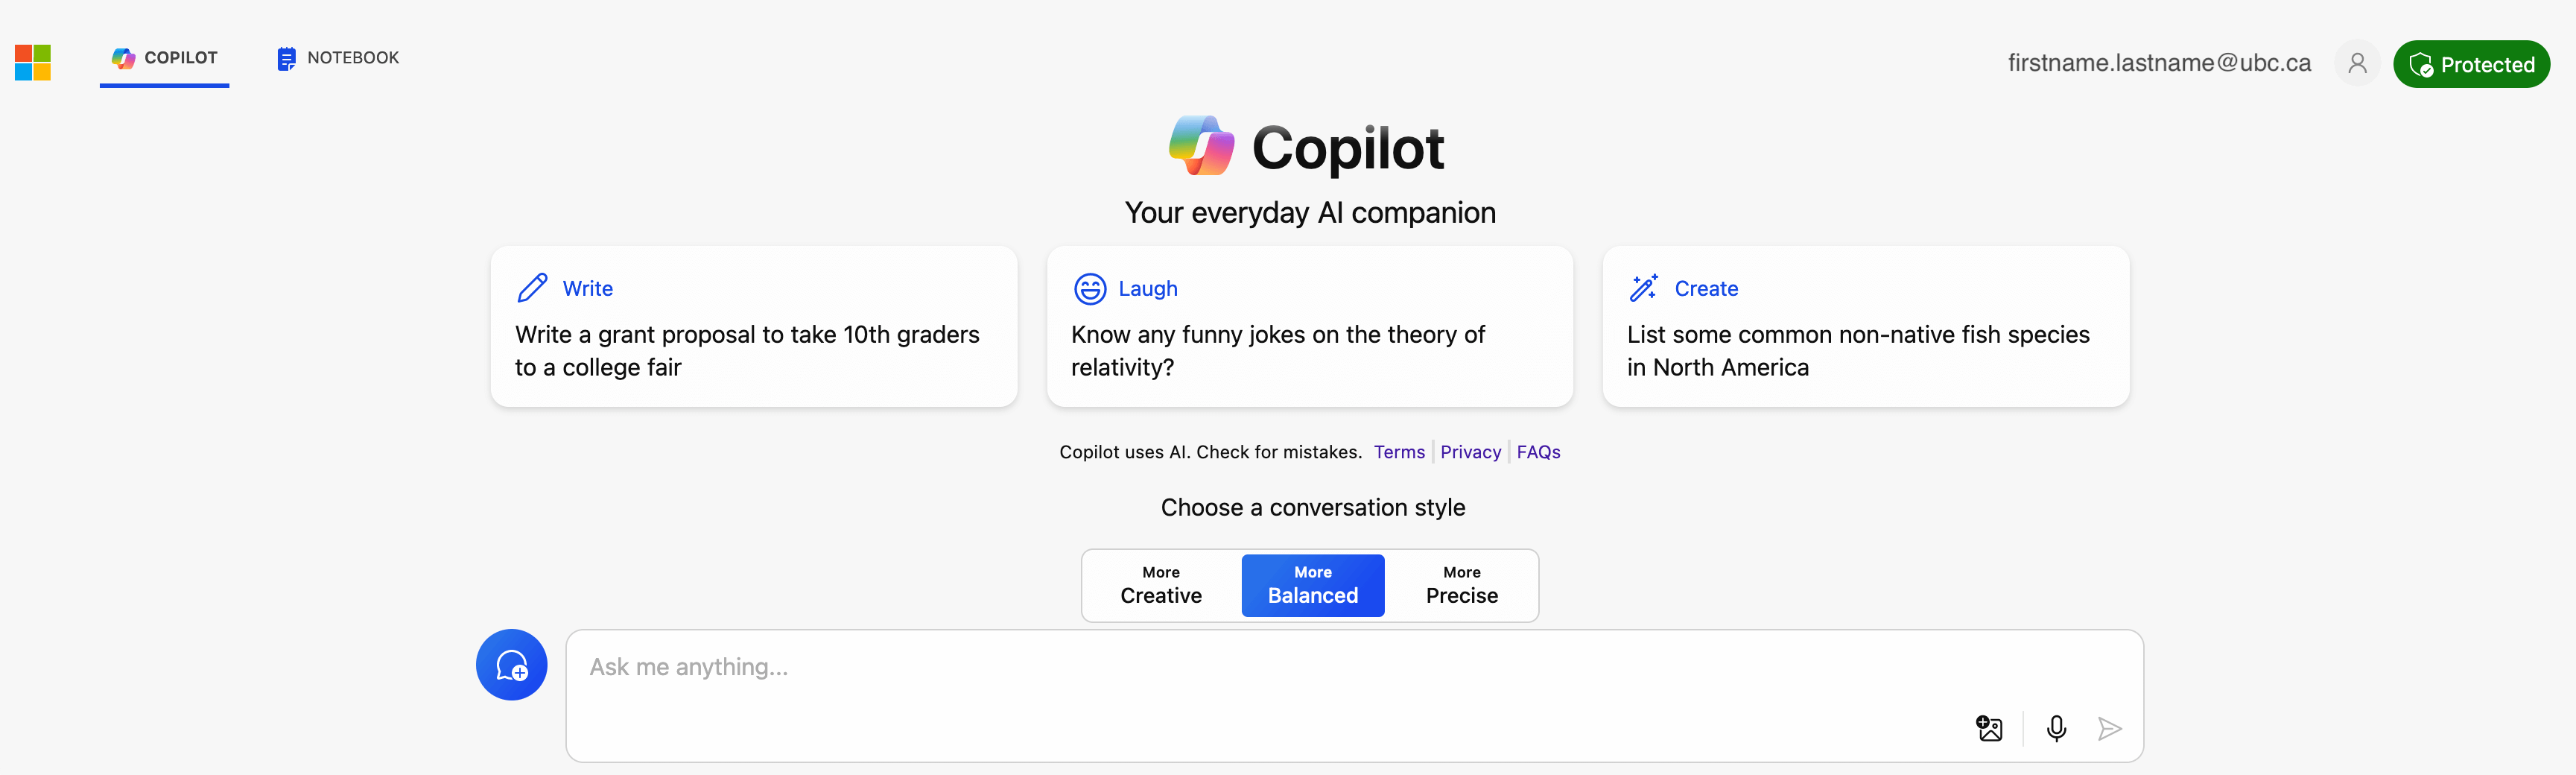 A screenshot of the Microsoft Copilot interface showing an input text box people can type into to use the tool as well as the ability to select the conversational style or choose from some pre-written prompts.